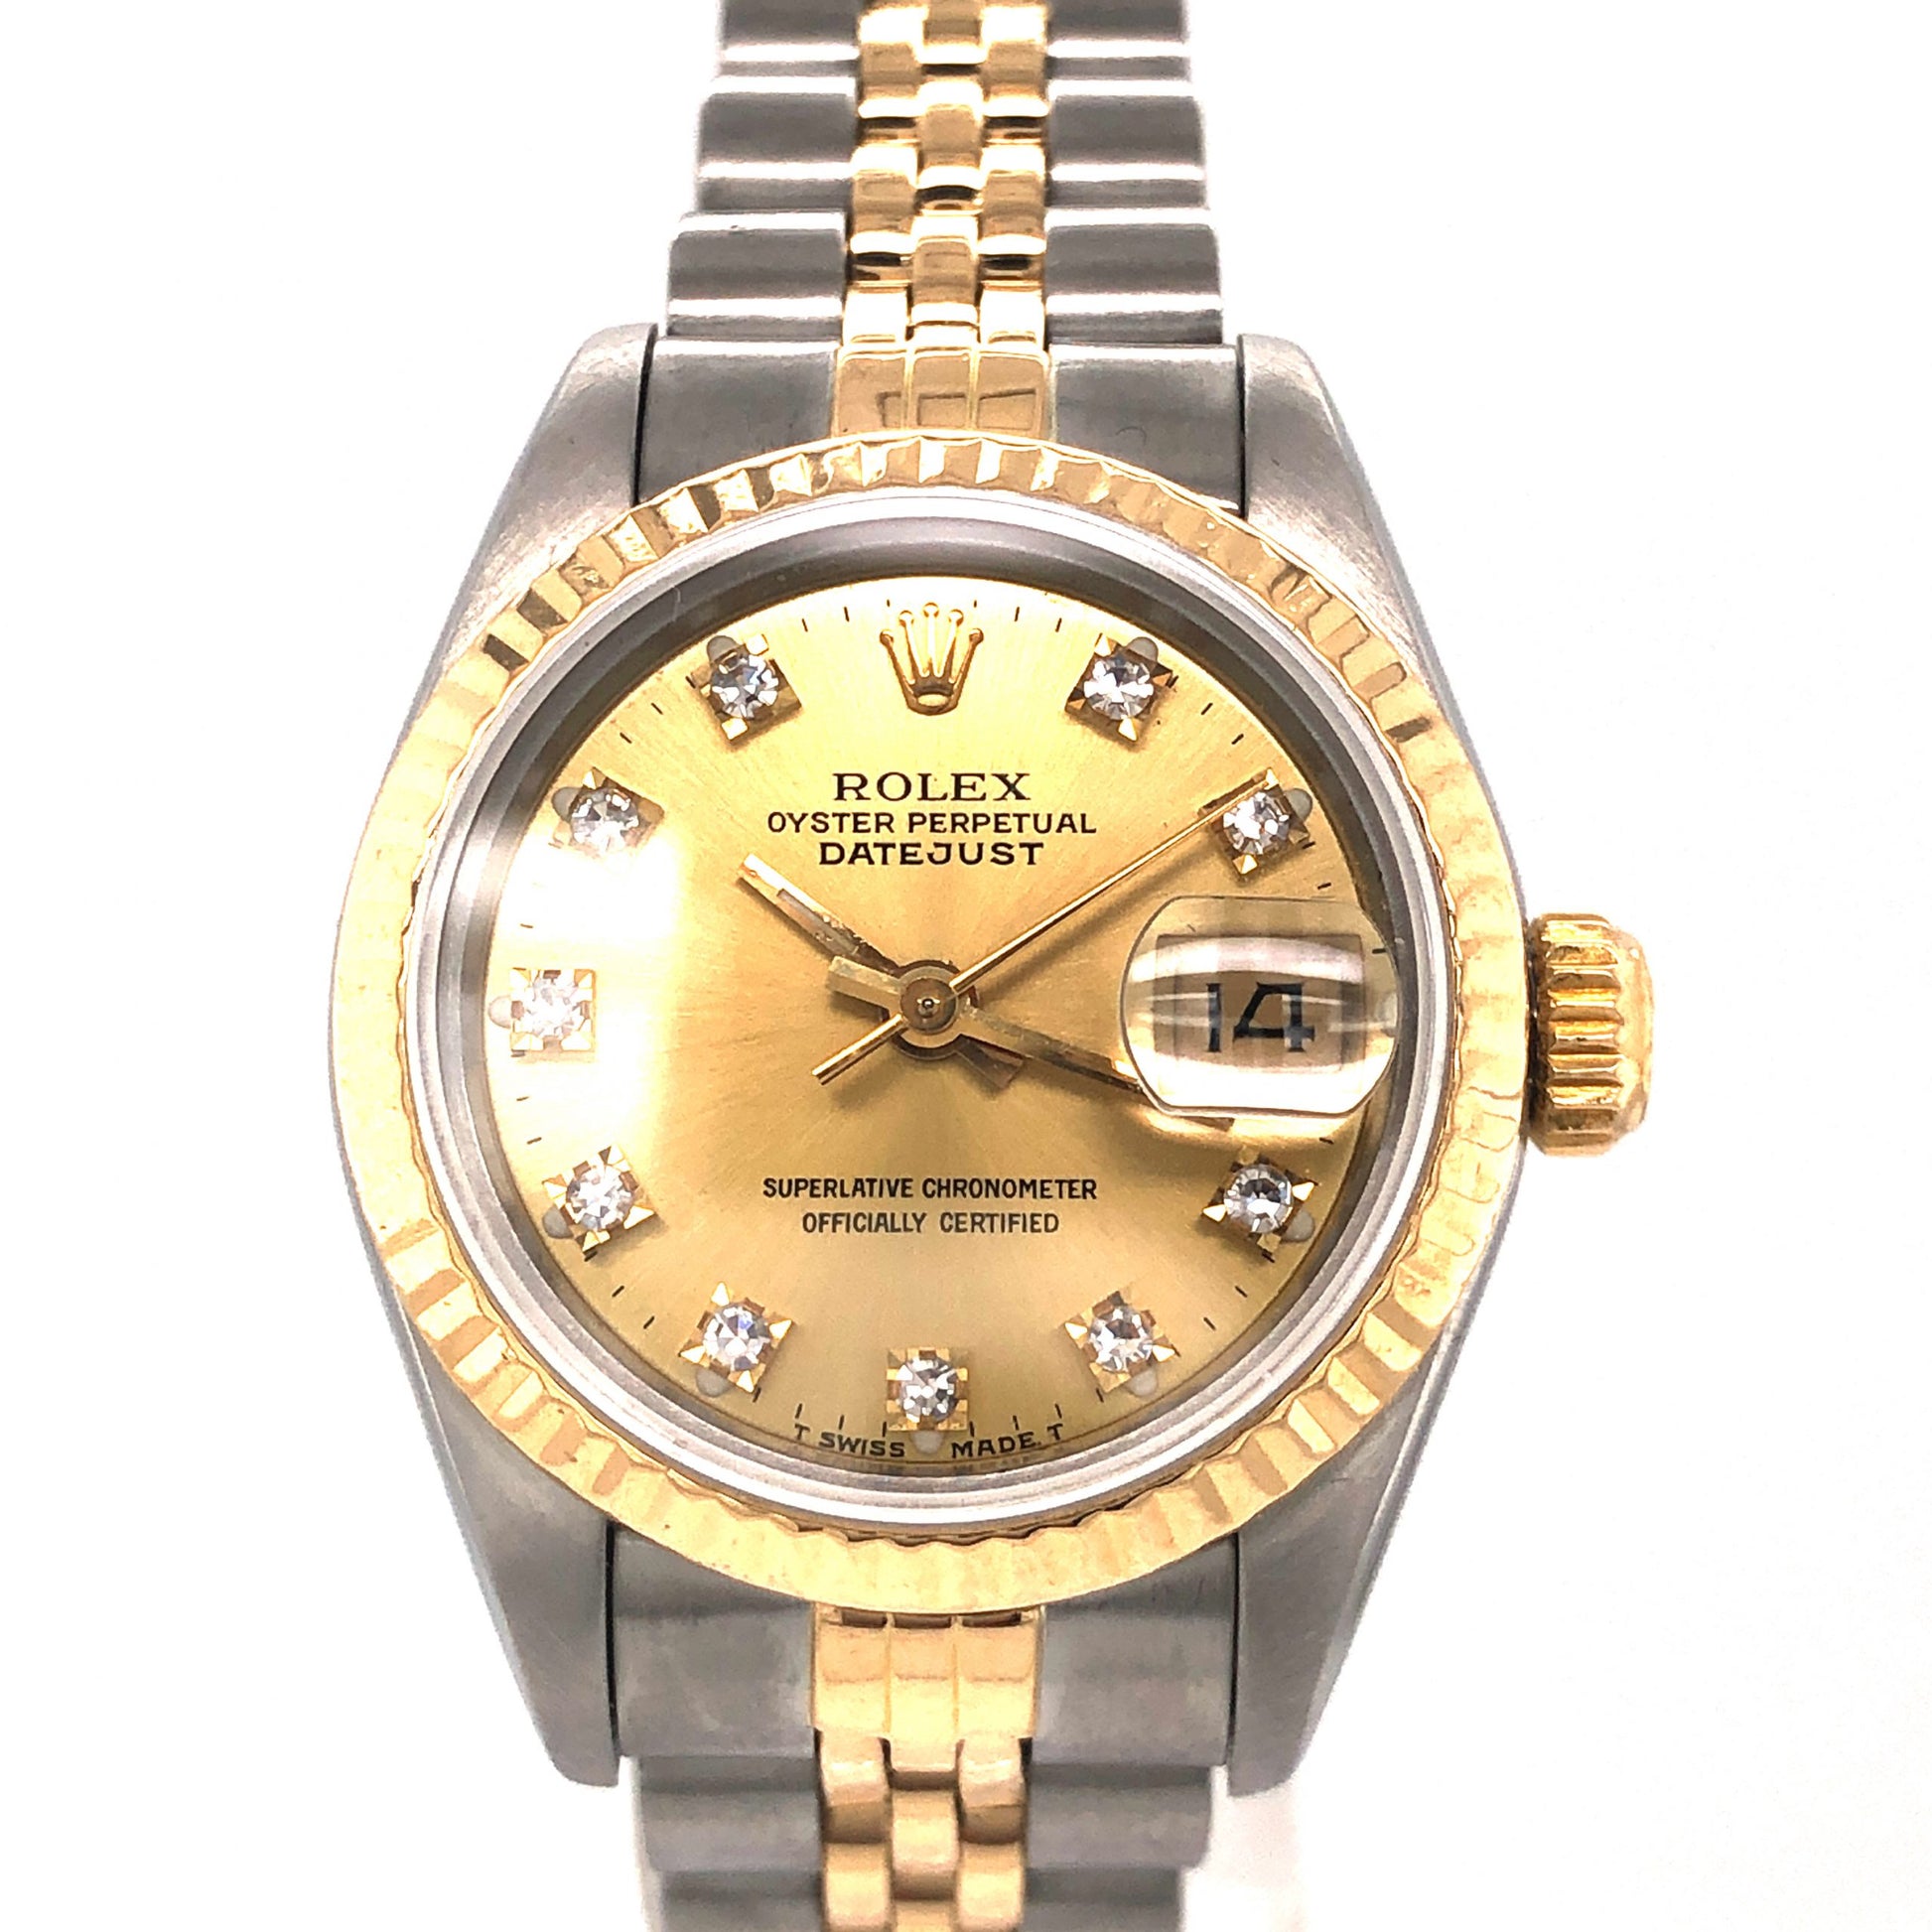 Ladies Rolex 2-Tone w/ Diamonds in 18k Yellow Gold & Stainless SteelComposition: Sterling Silver/18 Karat Yellow GoldTotal Diamond Weight: .10 ctTotal Gram Weight: 54.8 g